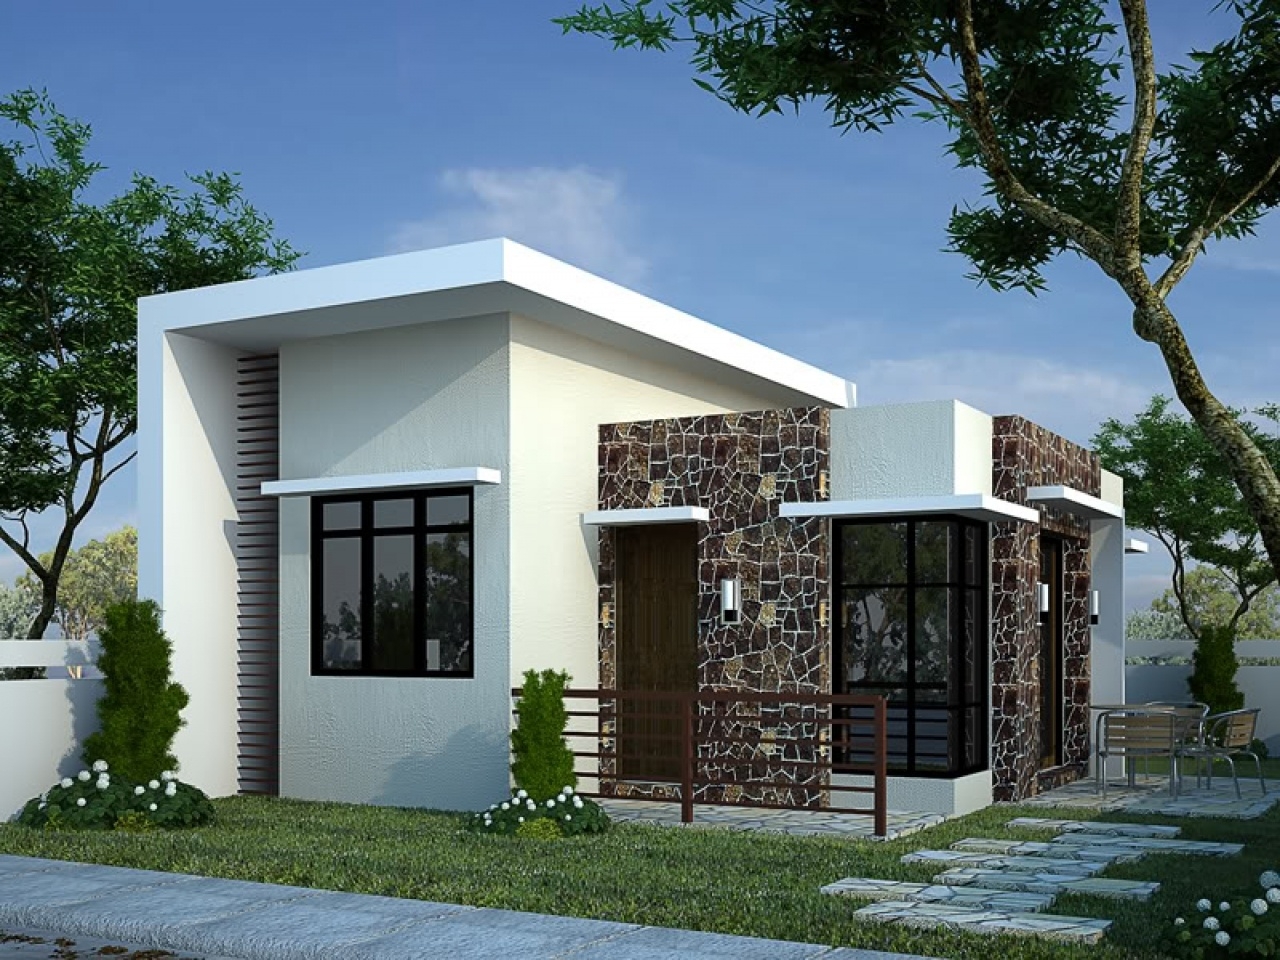 Good 3 bedroom bungalow house plans house style design : 3 bedroom bungalow within 3bedroom bungalow floor plan